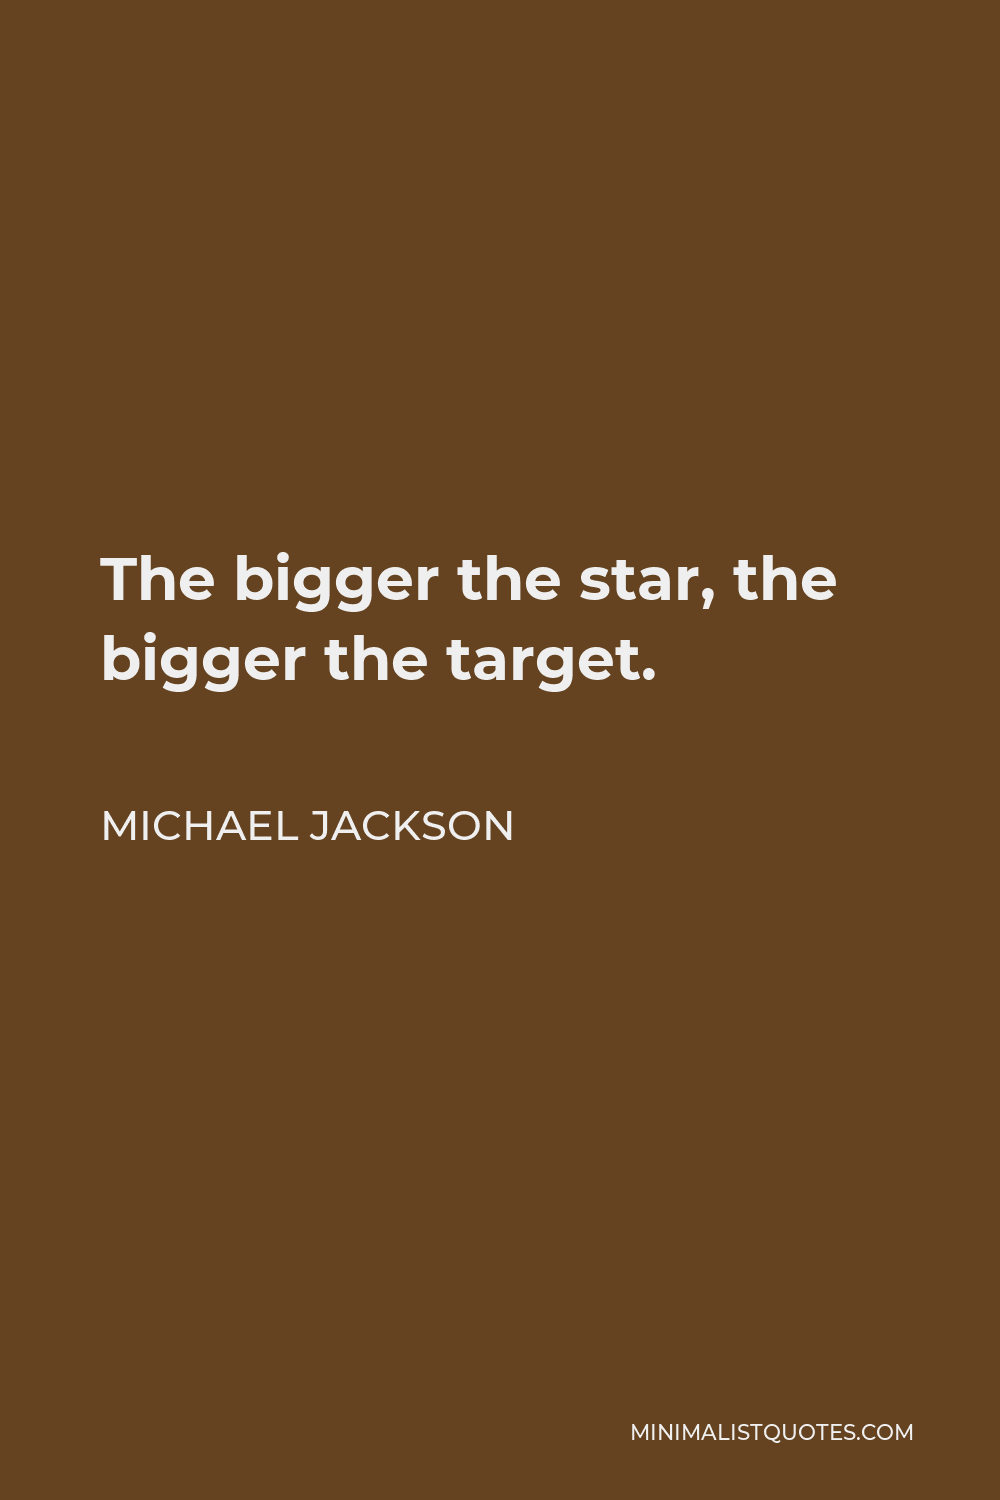 Michael Jackson Quote - The bigger the star, the bigger the target.